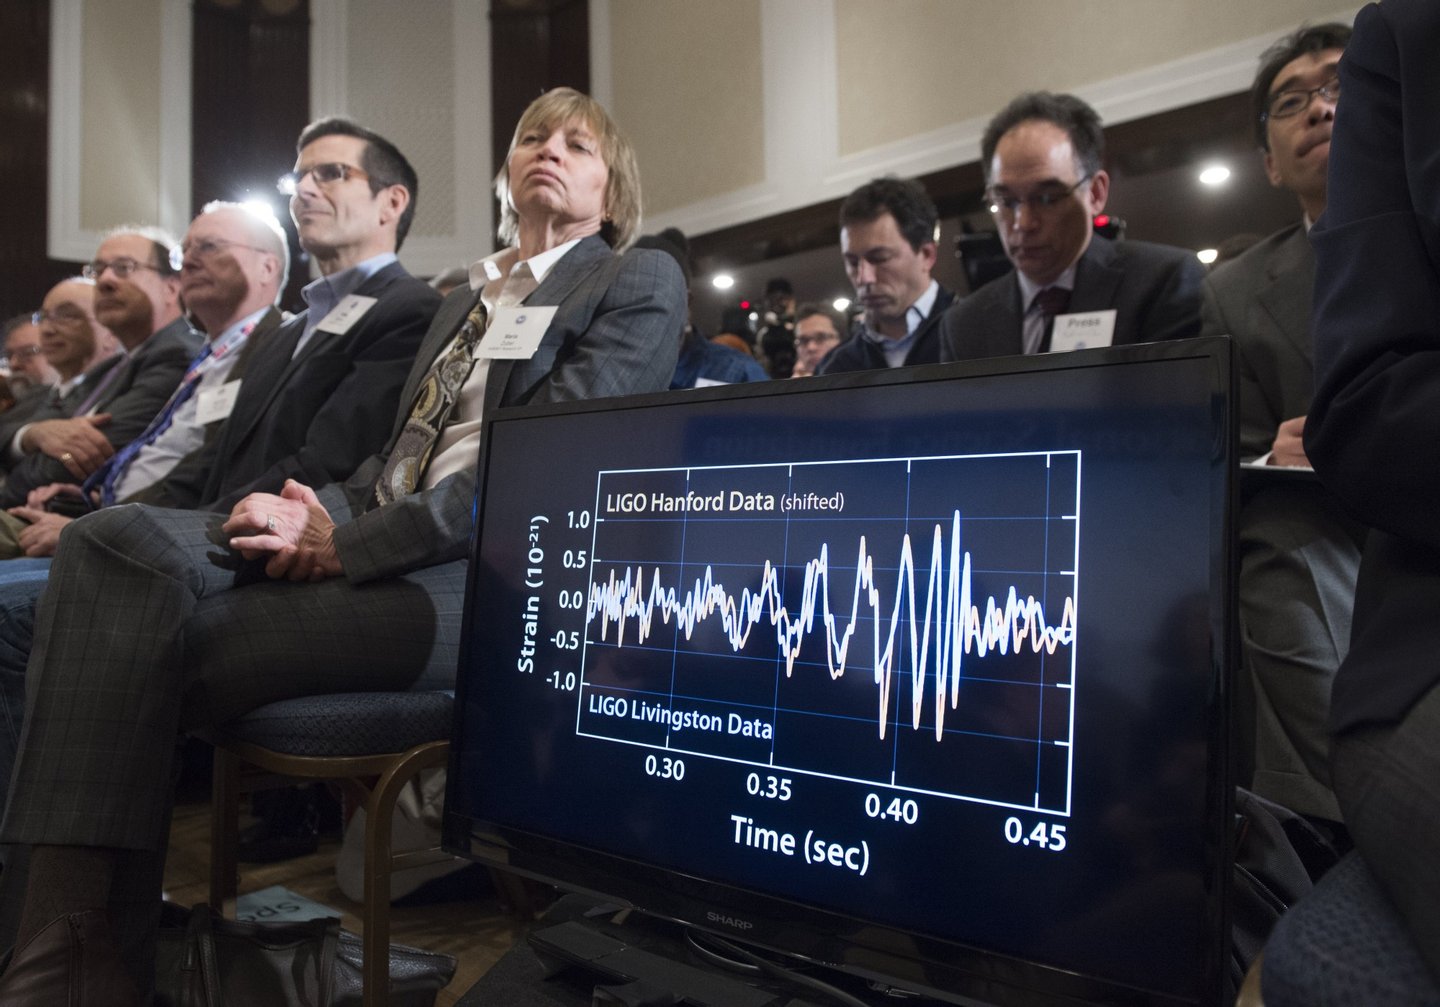 A screen displays a diagram showing the ripples in the fabric of spacetime called gravitational waves that scientists have observed for the first time by the LIGO detector, confirming a prediction of Albert Einstein's theory of relativity, during a press conference at the National Press Club in Washington, DC, February 11, 2016. The machines that gave scientists their first-ever glimpse at gravitational waves are the most advanced detectors ever built for sensing tiny vibrations in the universe.The two US-based underground detectors are known as the Laser Interferometer Gravitational-wave Observatory, or LIGO for short. / AFP / SAUL LOEB (Photo credit should read SAUL LOEB/AFP/Getty Images)